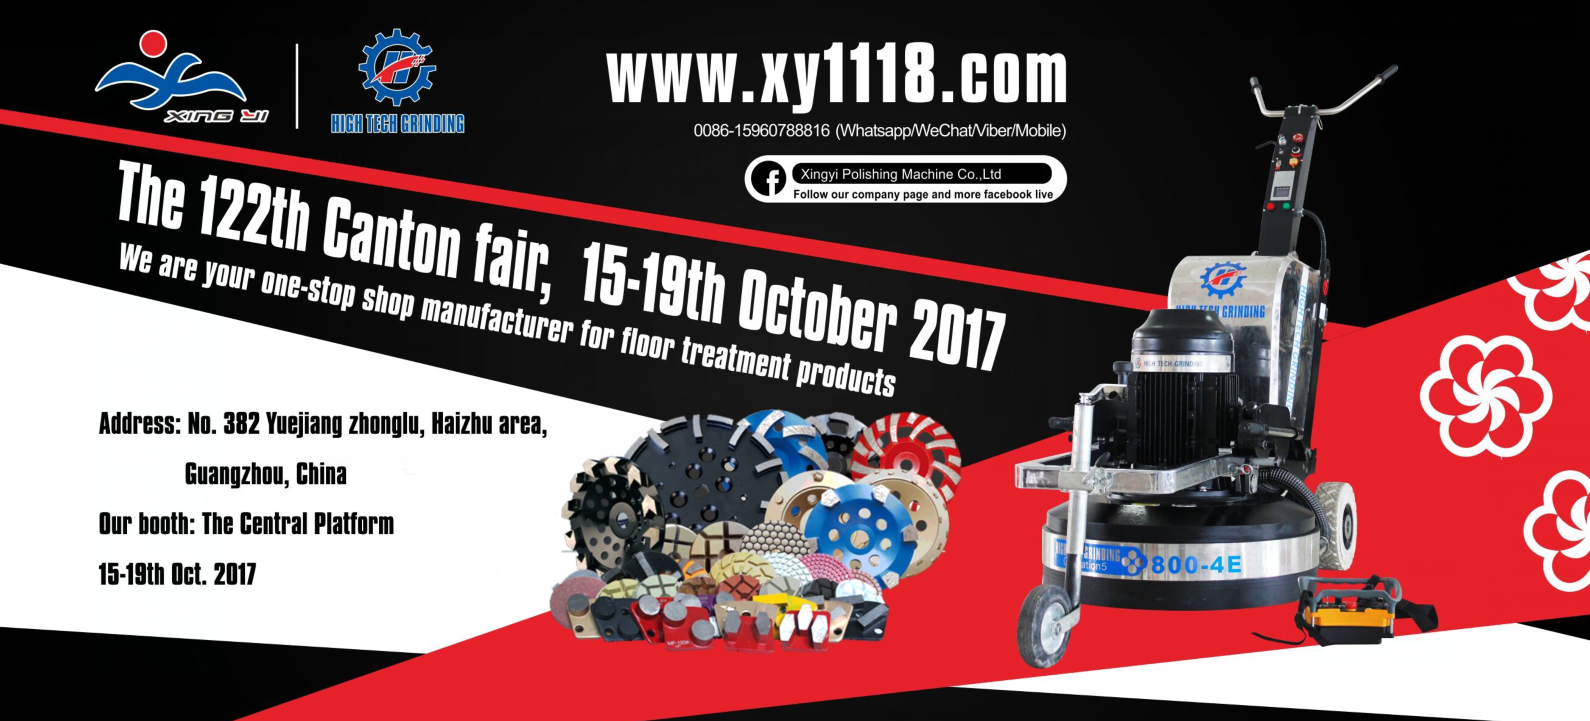 RE: Xingyi will be in the 122th Canton Fair at  15-19th. Oct.2017